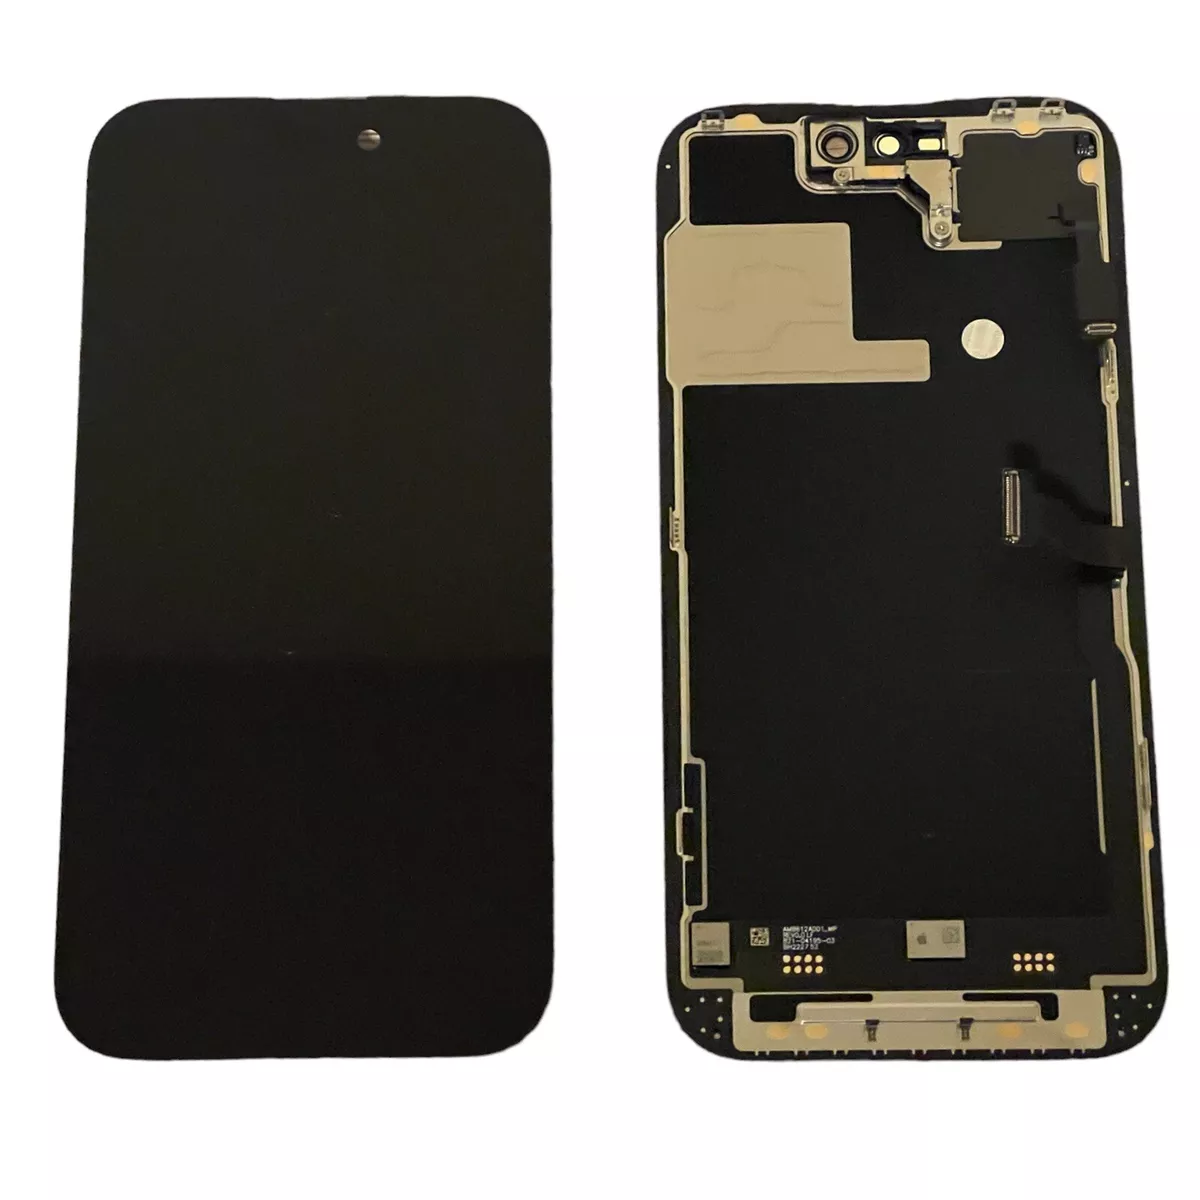 iPhone 14 Pro Max screen replacement